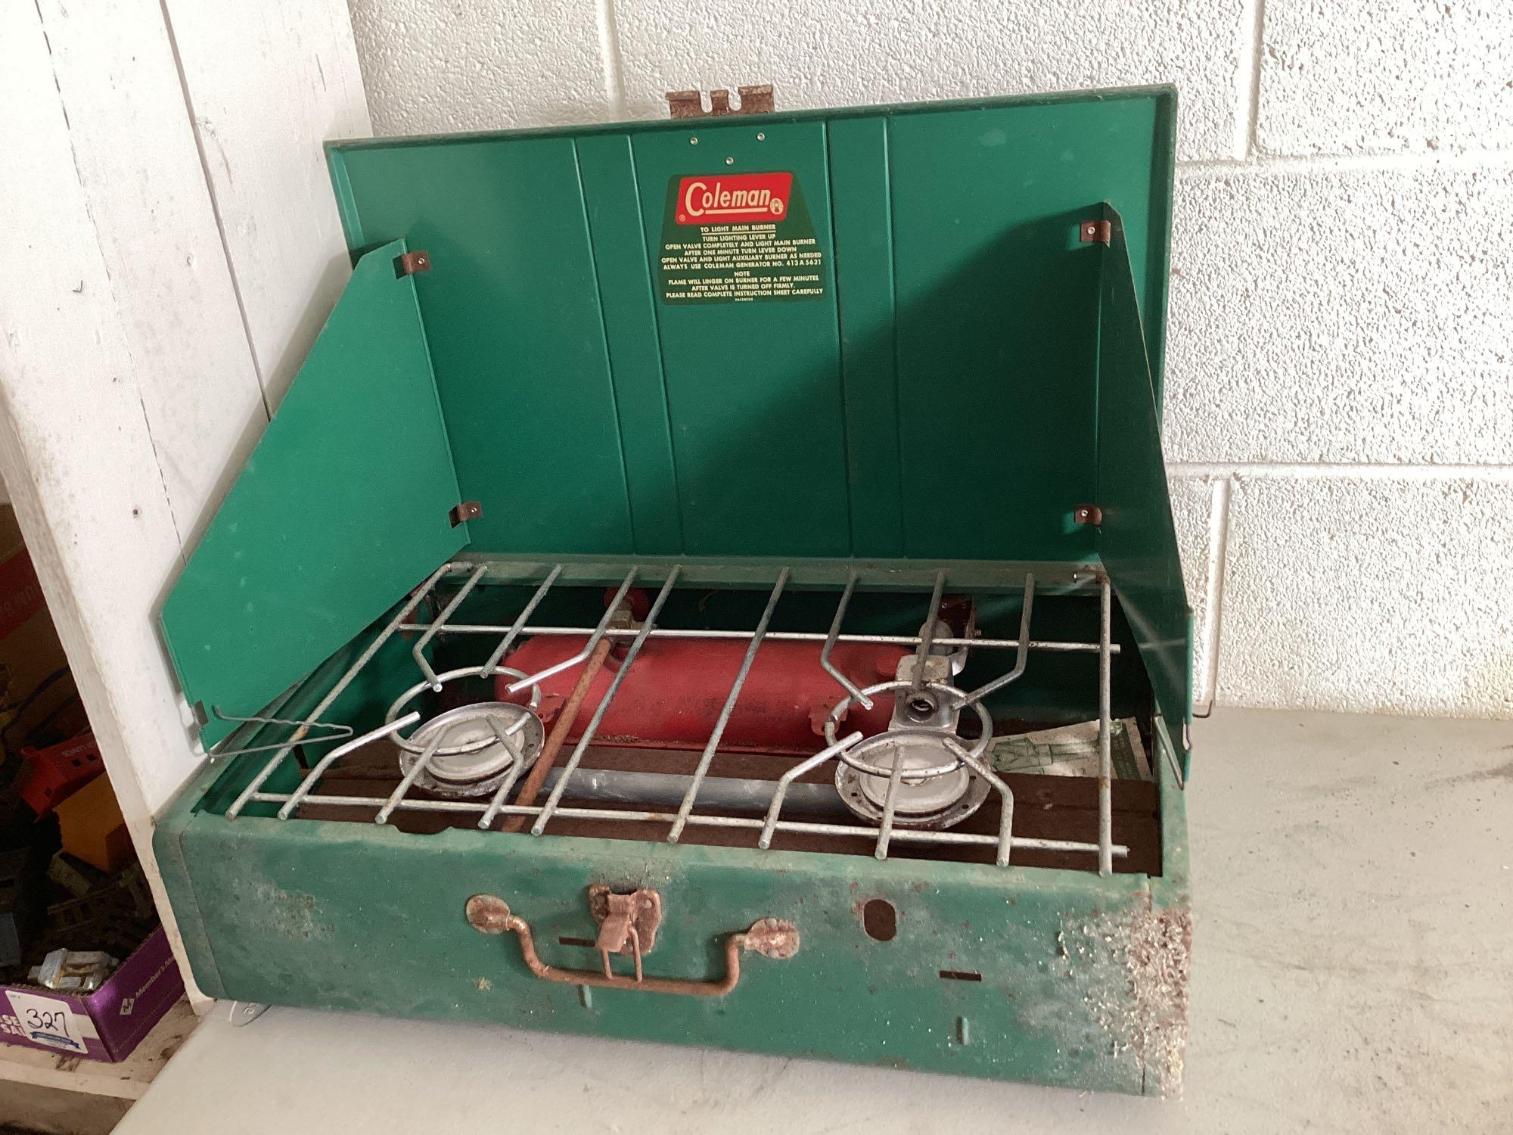 Image for Coleman Camp Stove are Webber Grill